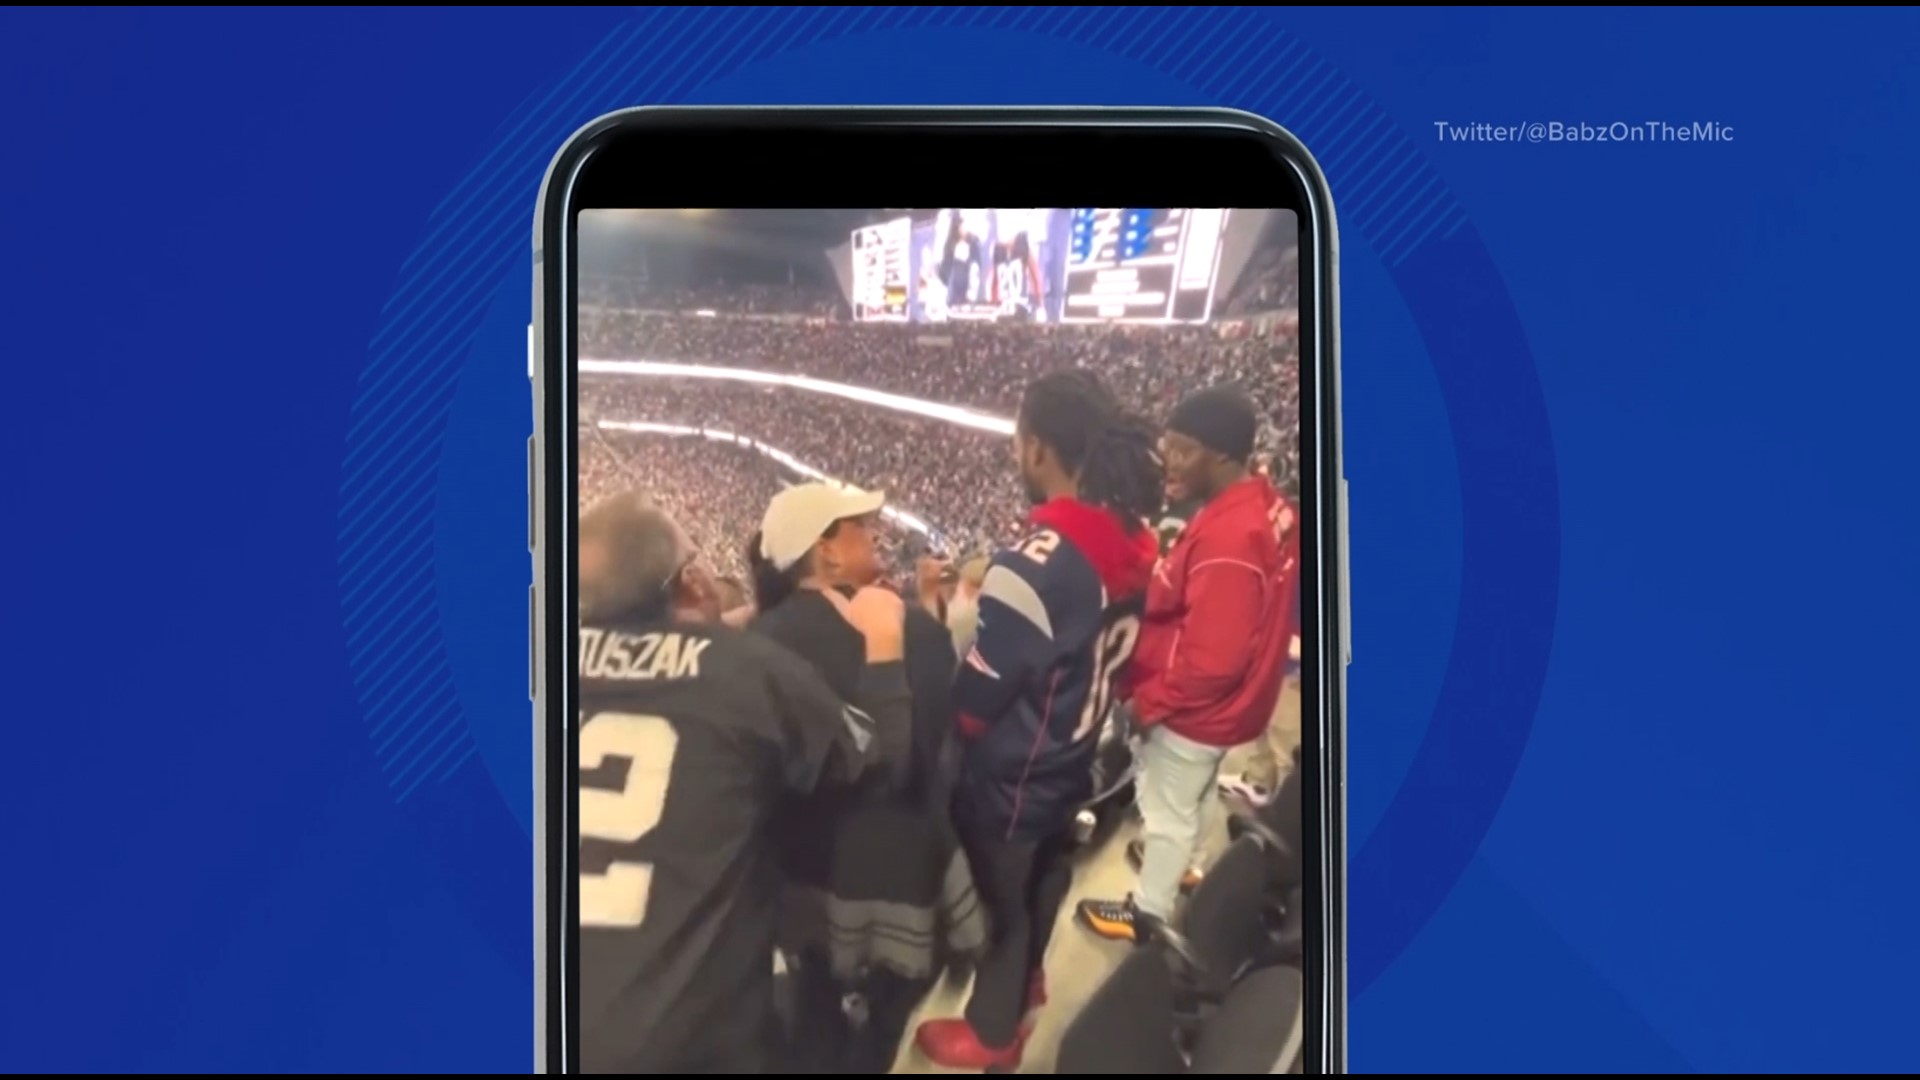 Jerry Edmond is a Connecticut resident and has been a lifelong Patriots fan. He was attending his first-ever game in person.